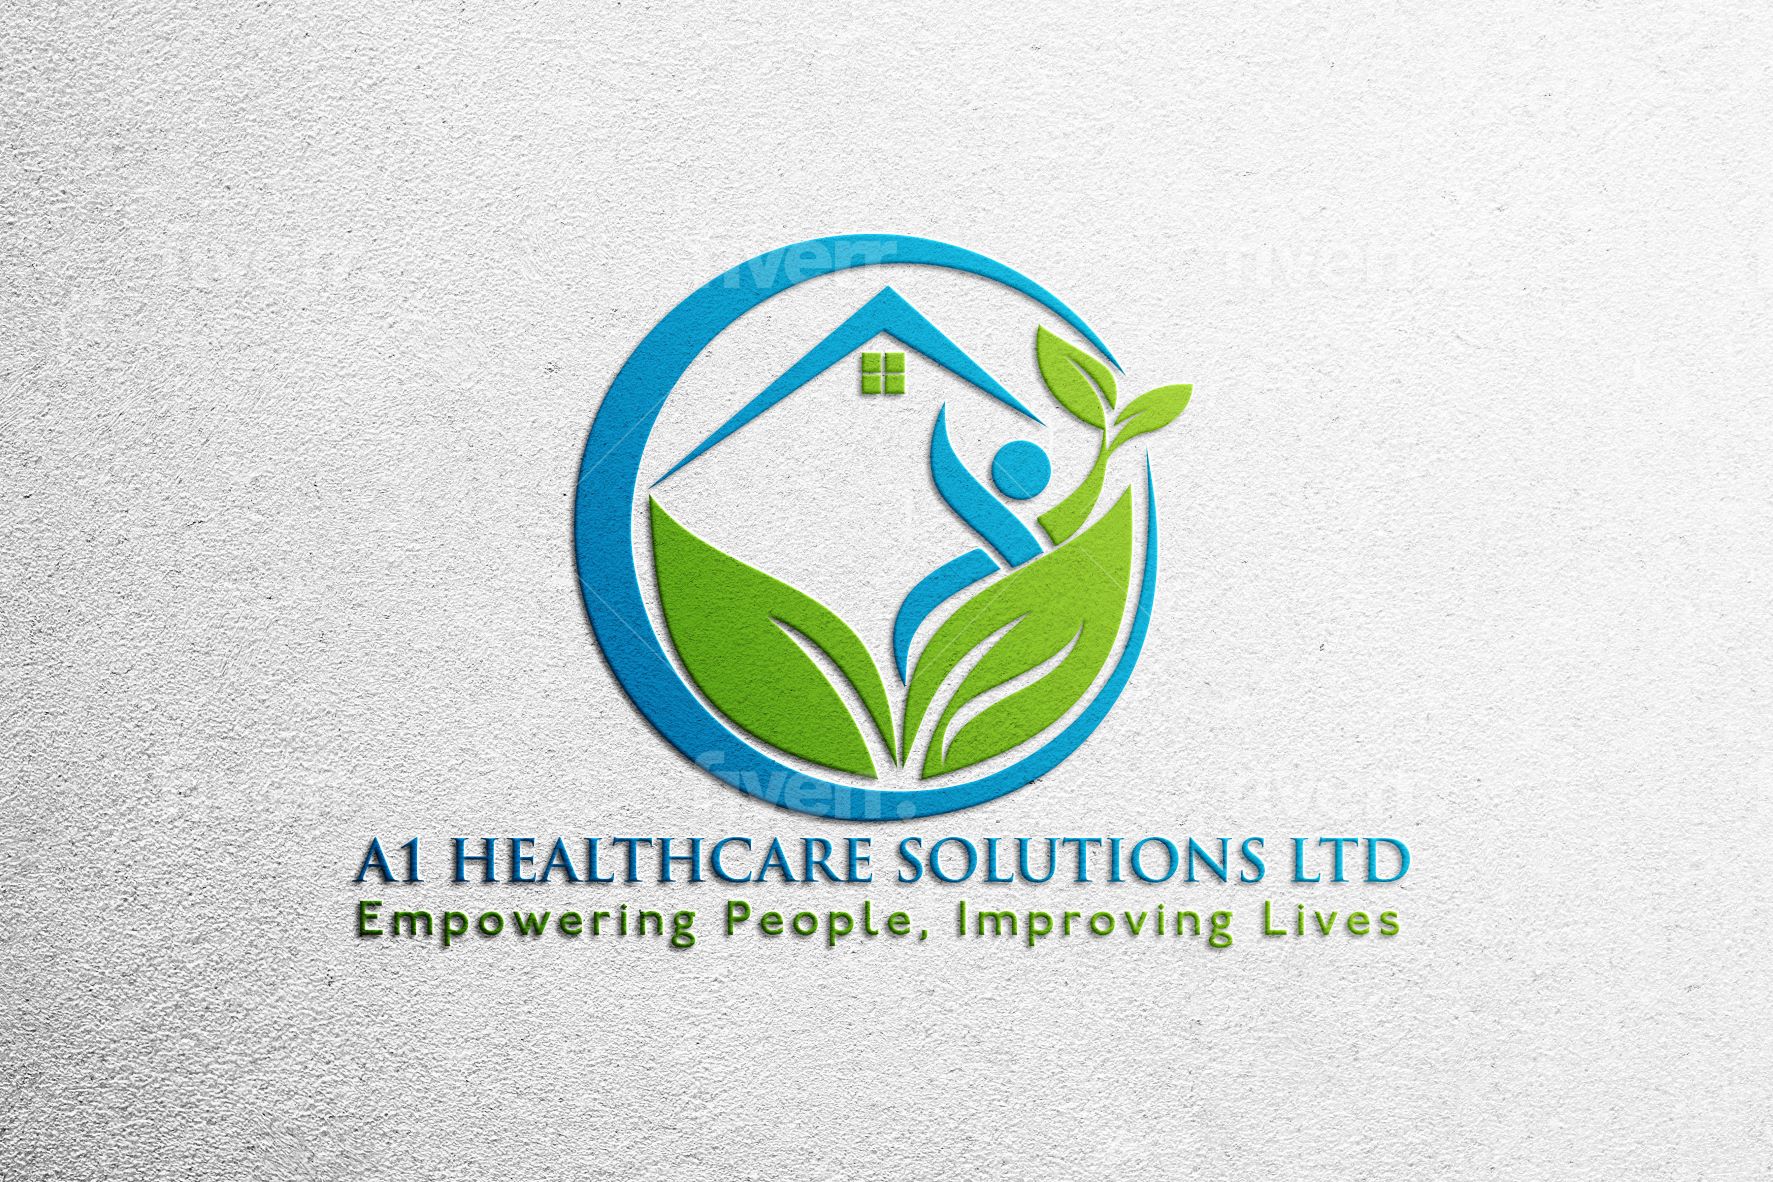 Empowering People, Improving Lives